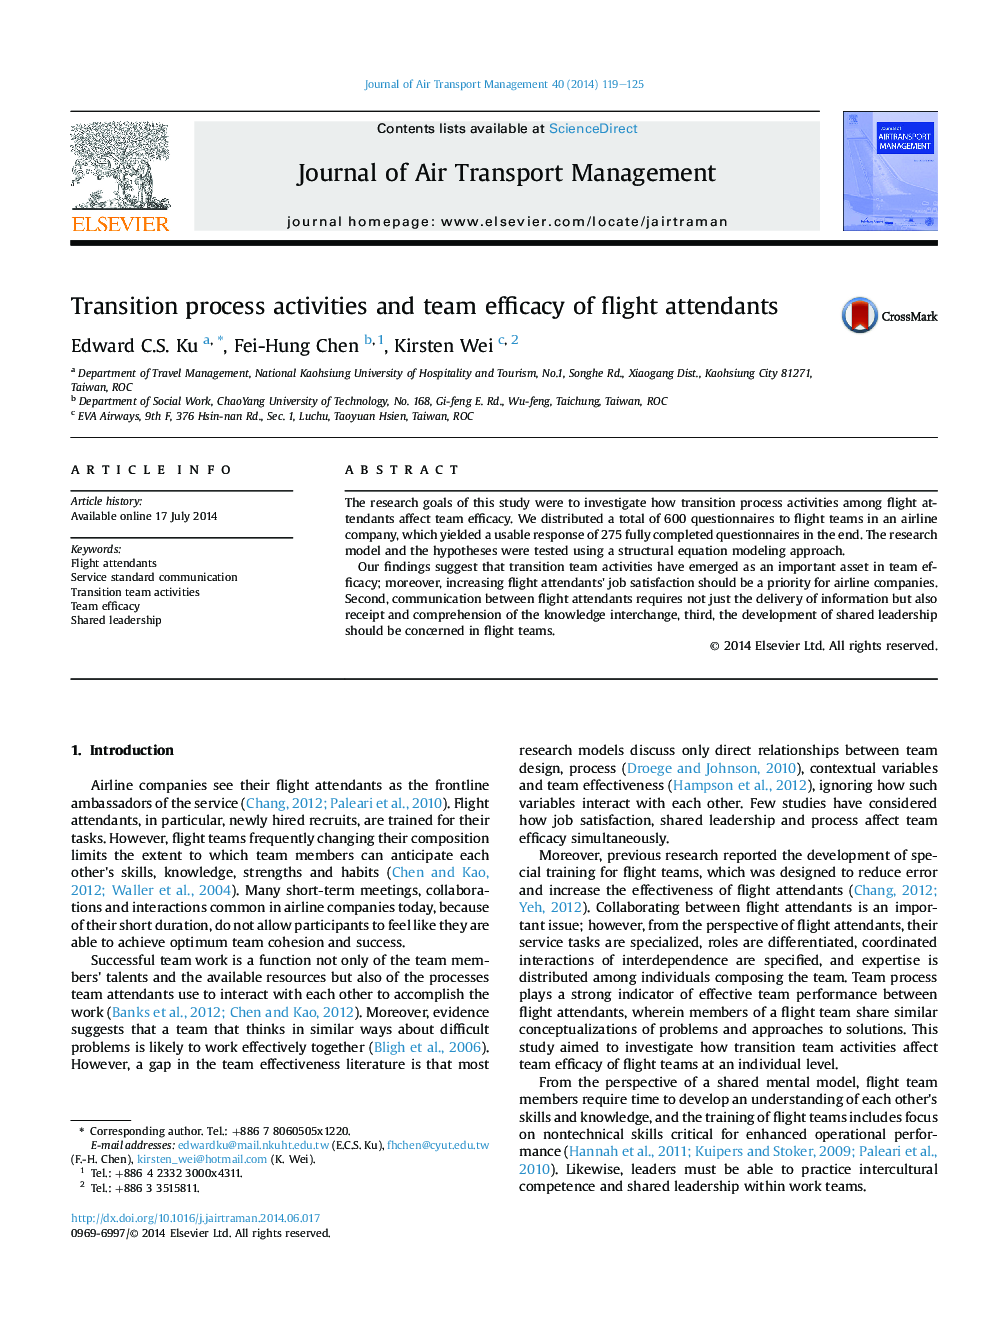 Transition process activities and team efficacy of flight attendants